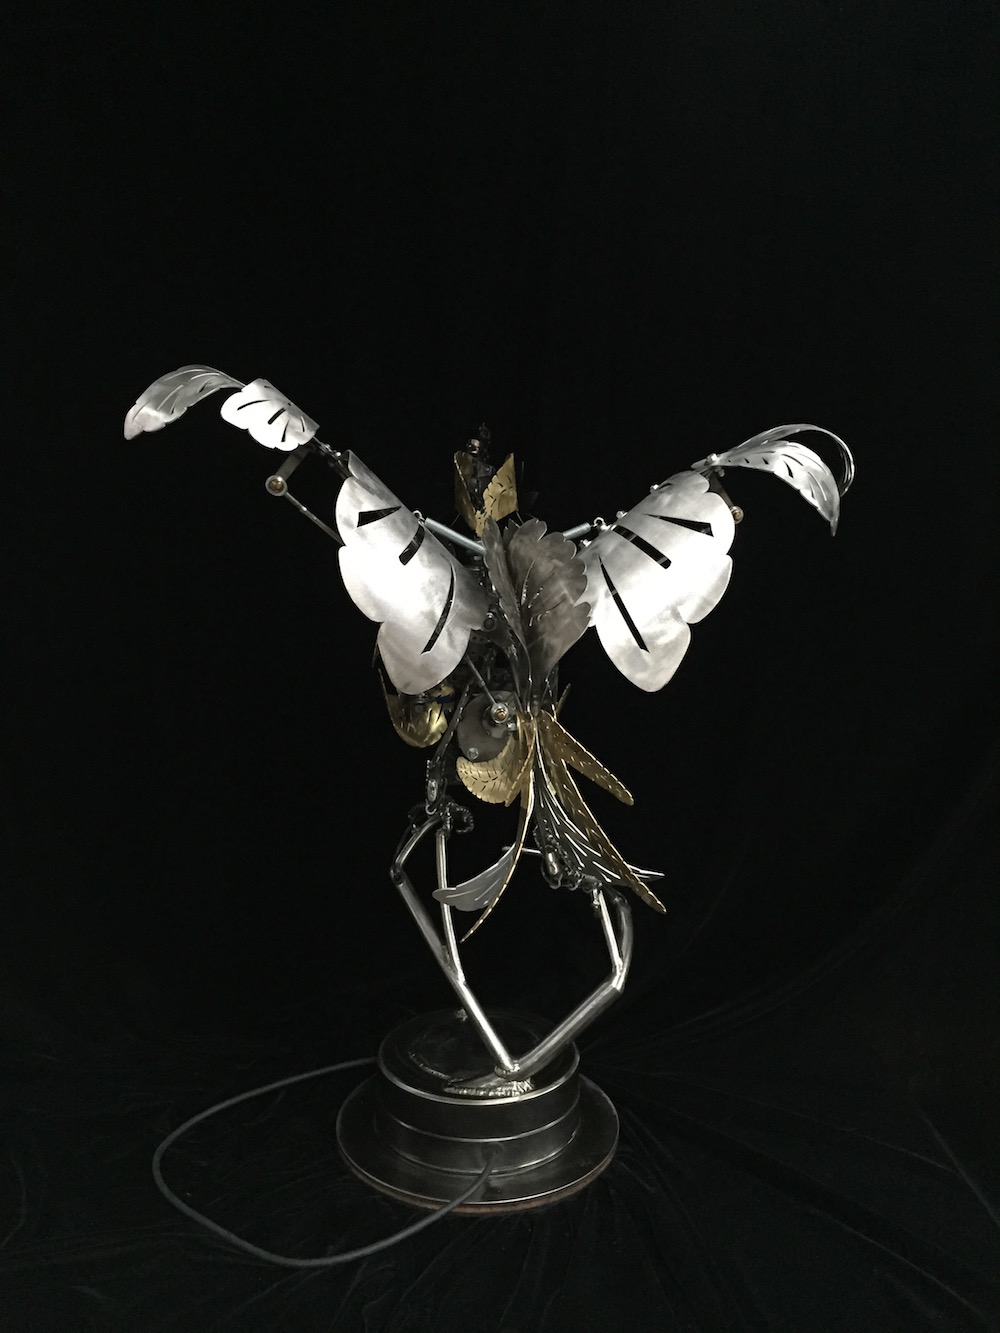 Kinetic Sculpture "Amelia" by artist Chris Cole 002 Wing Detail